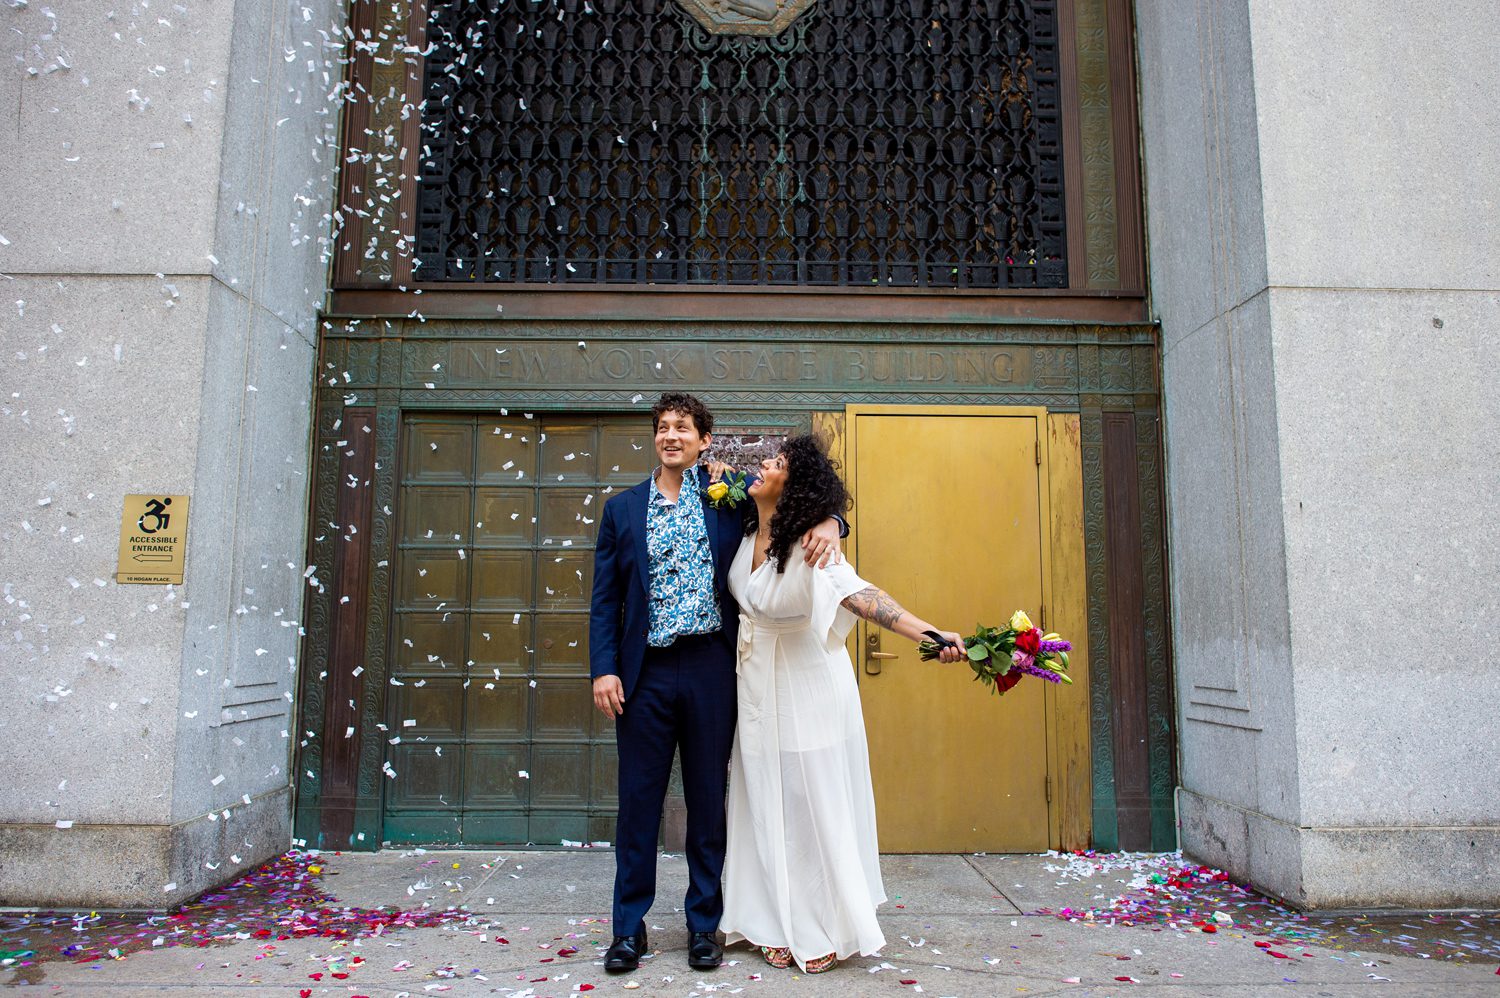 Eloped at City Hall in NYC